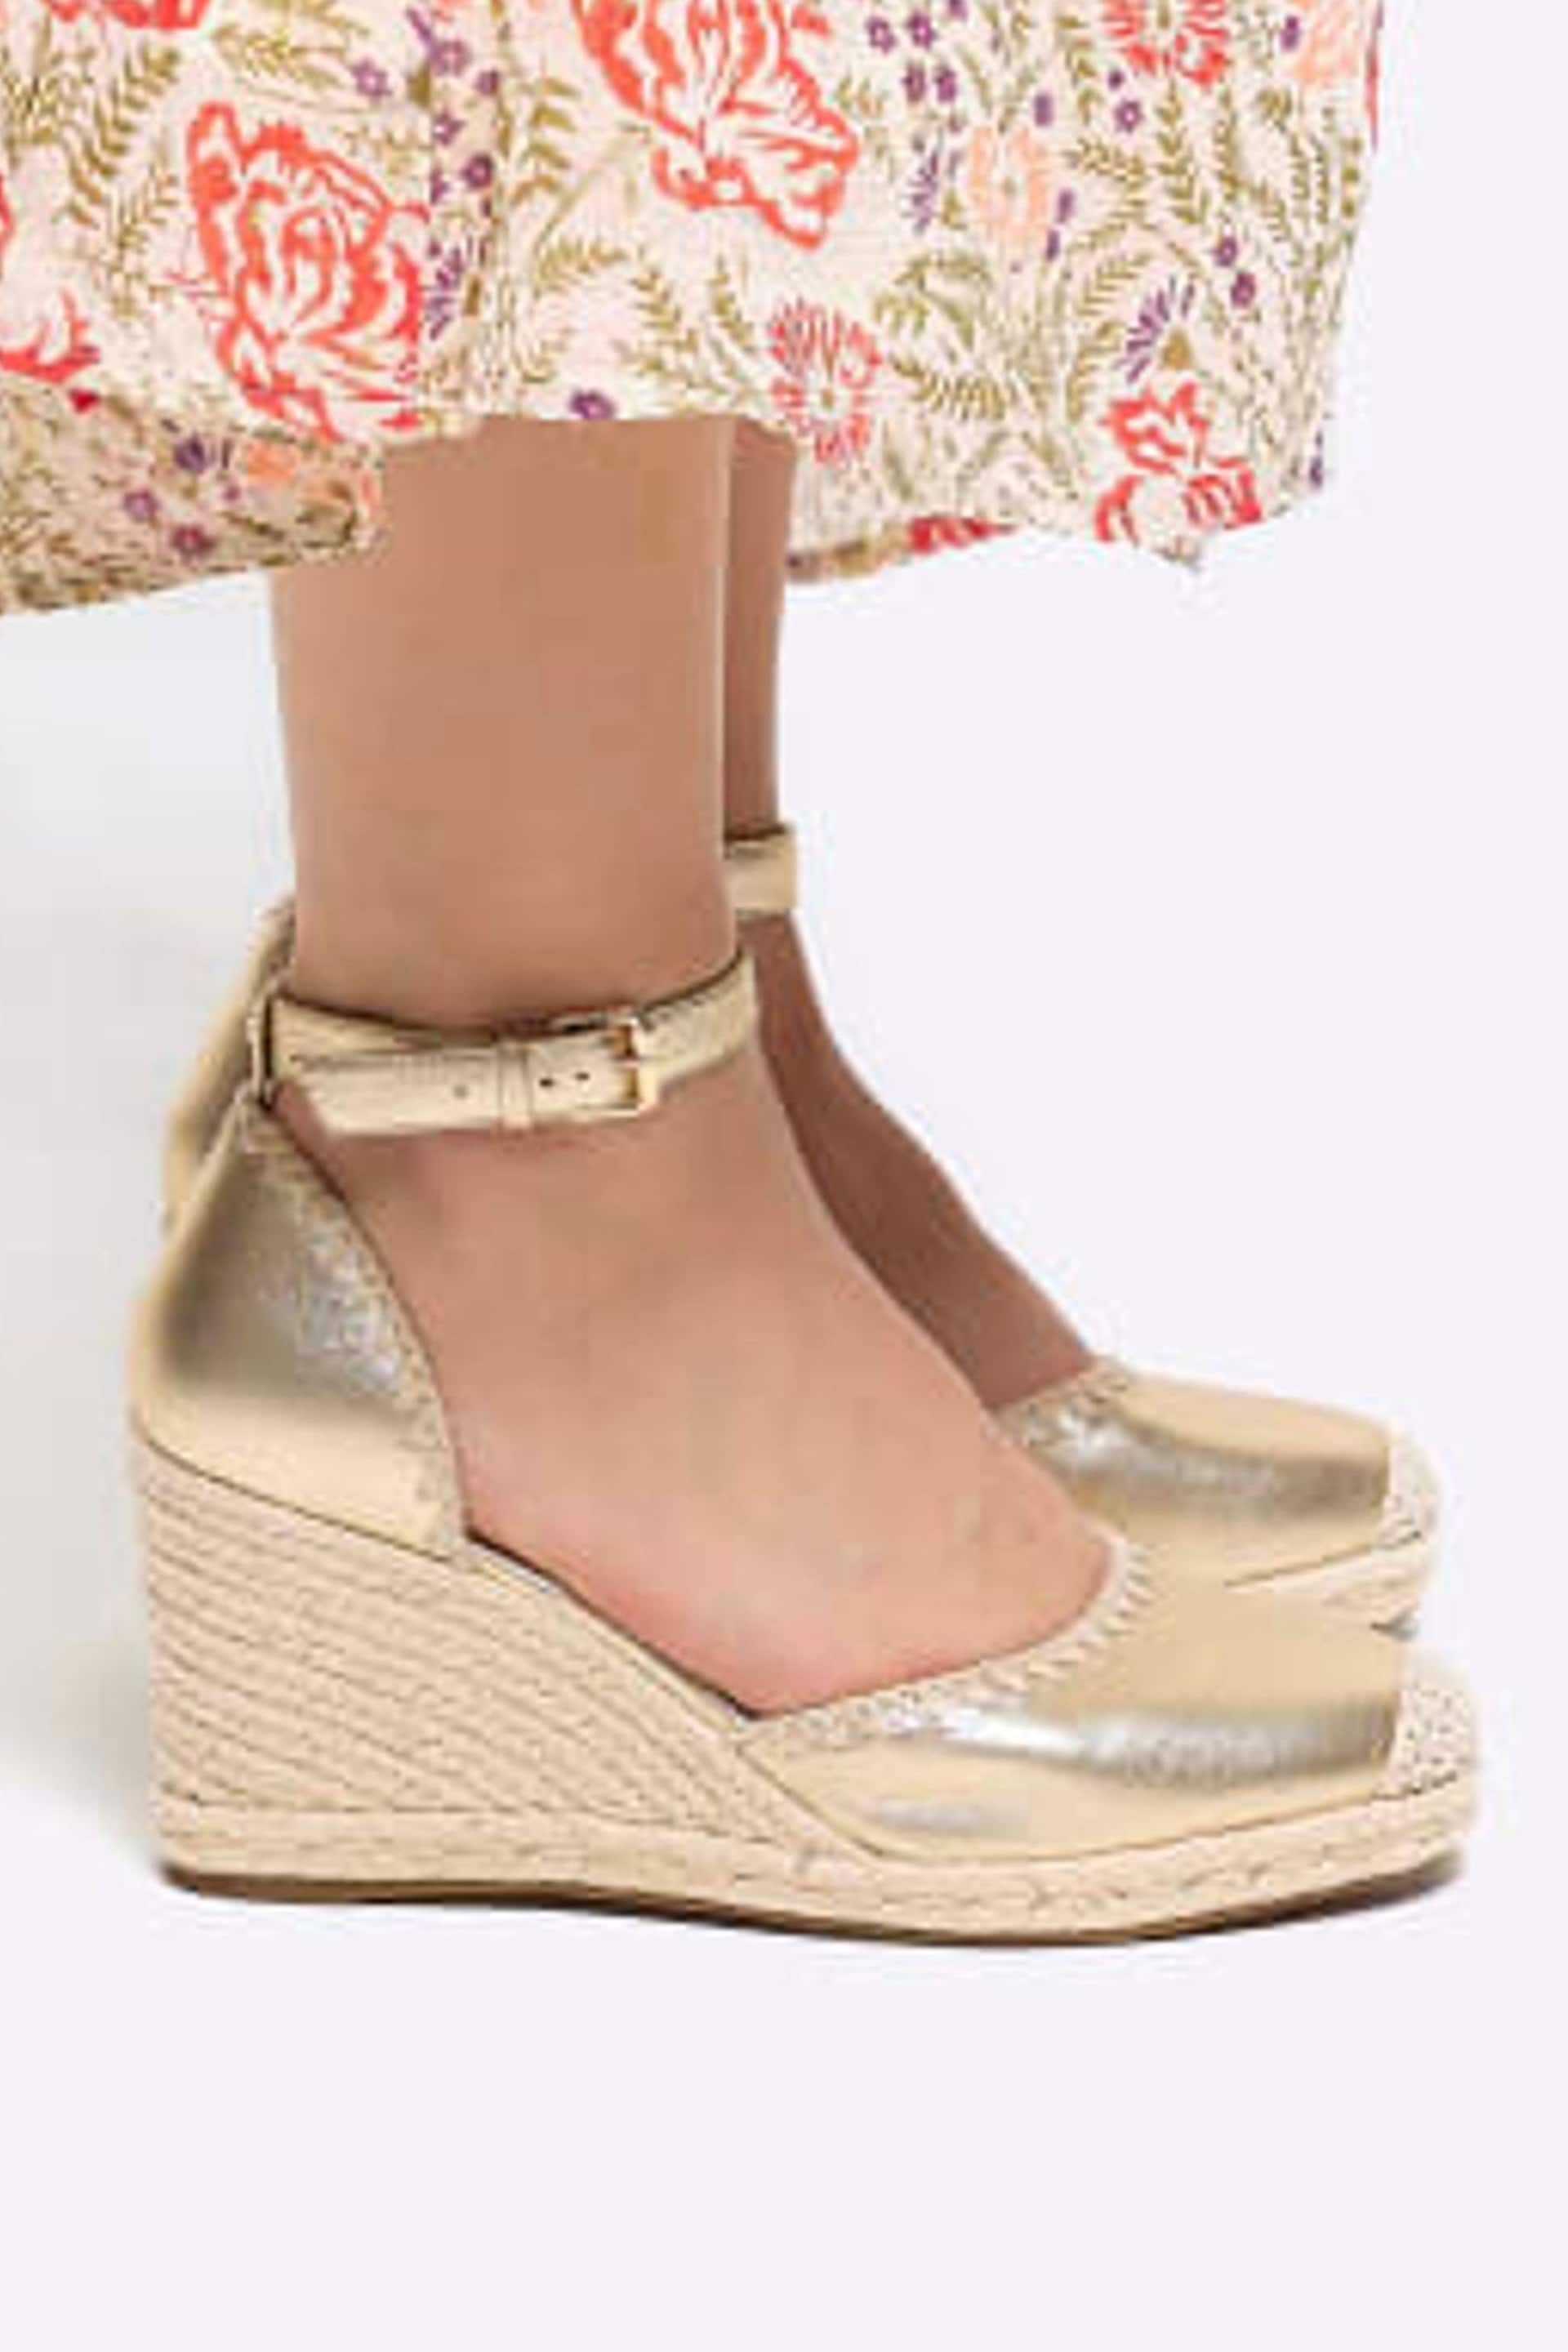 River Island Gold Espadrille Wedge Sandals - Image 1 of 5